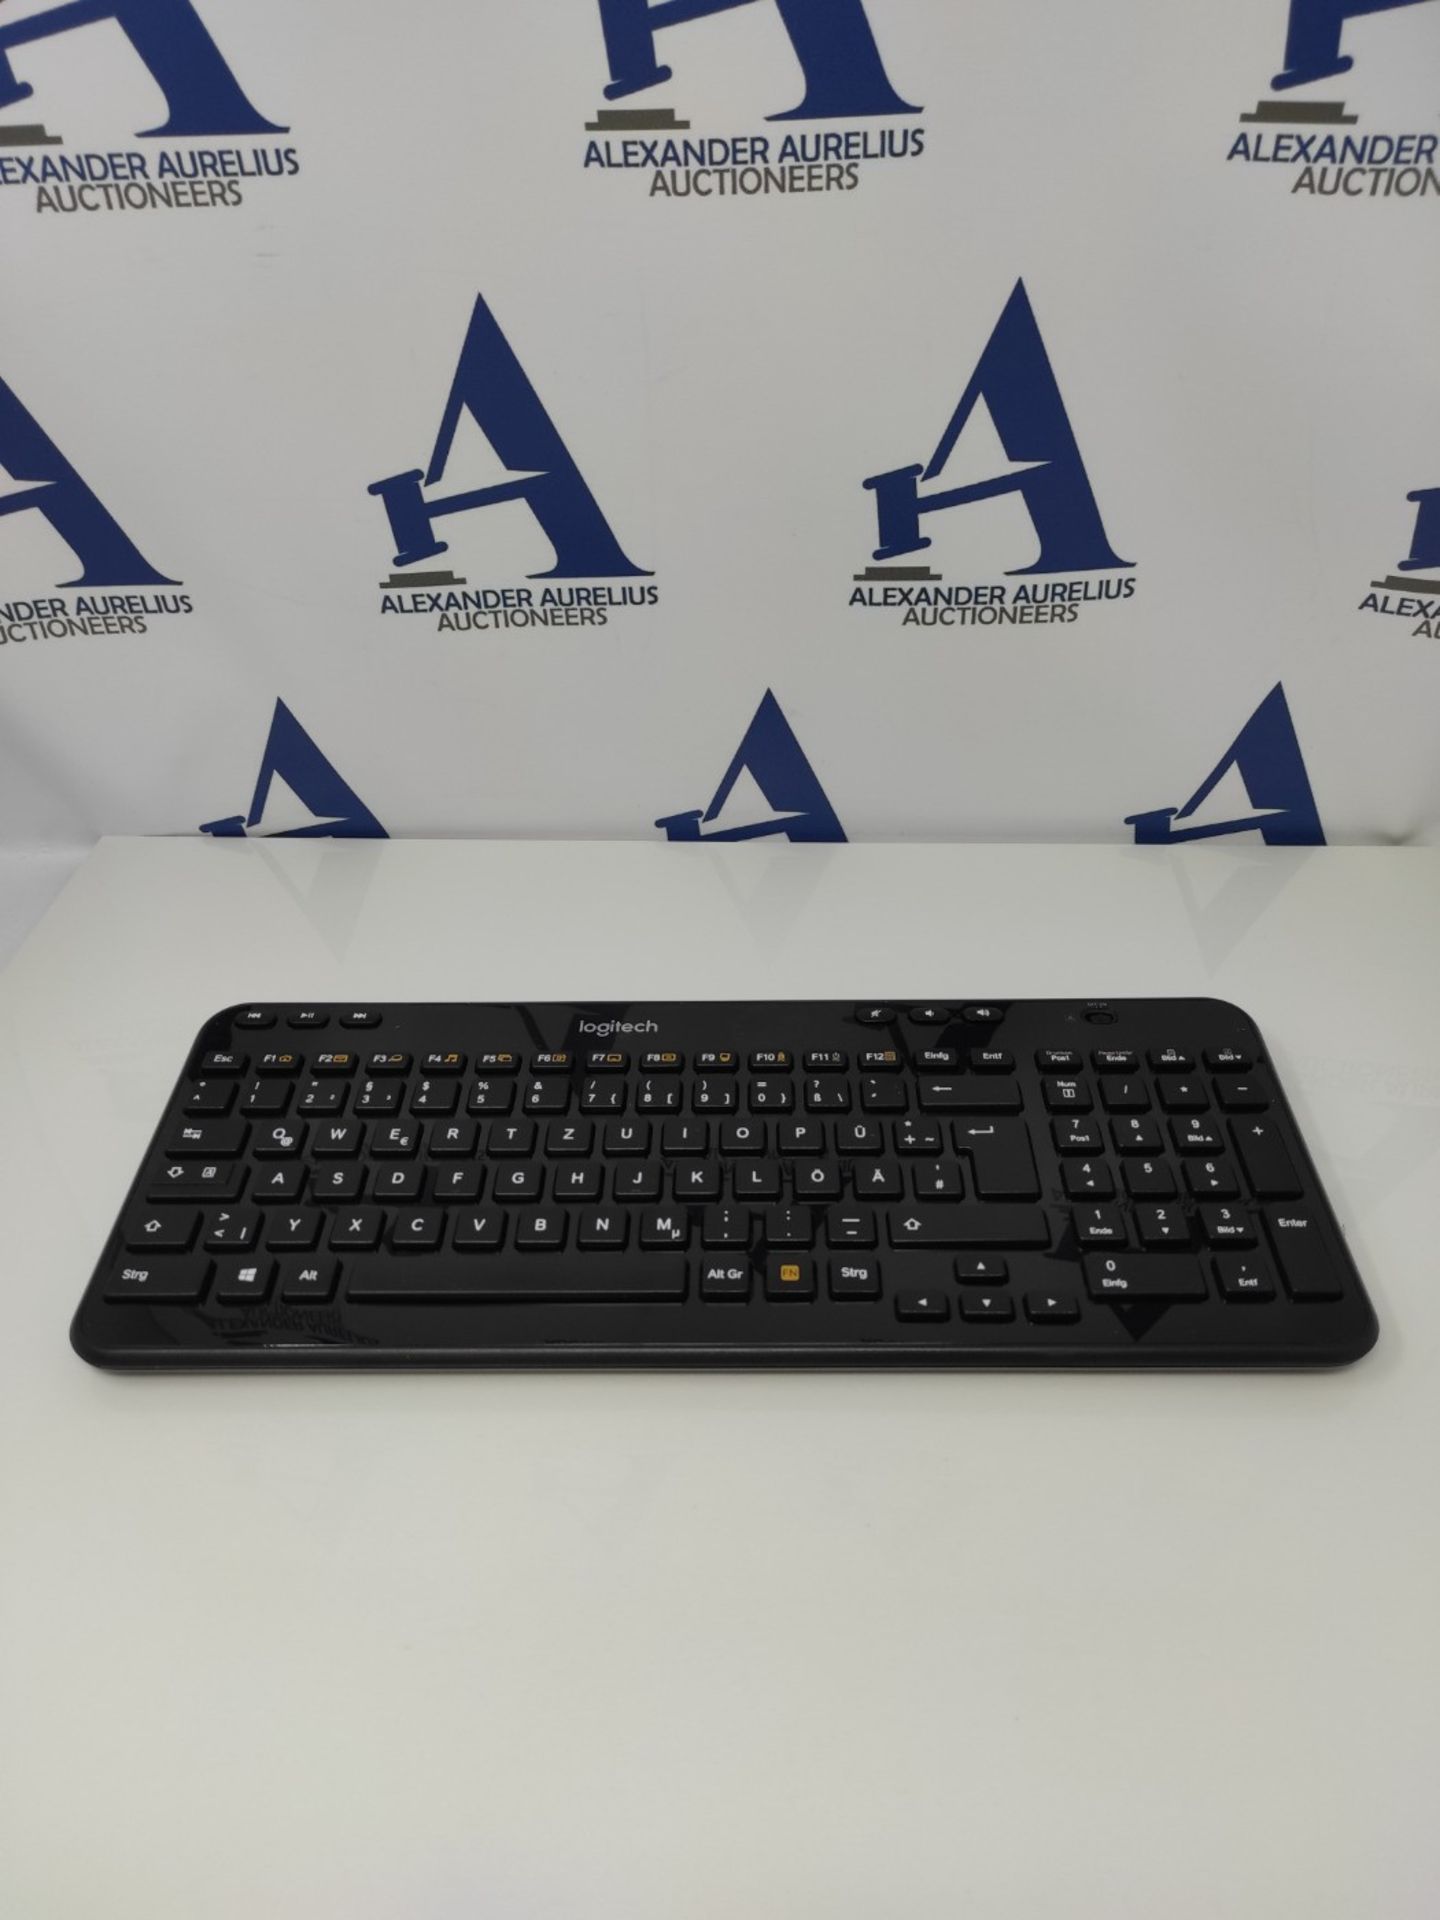 [INCOMPLETE] Logitech K360 Compact Wireless Keyboard for Windows, QWERTZ German Layout - Image 3 of 3